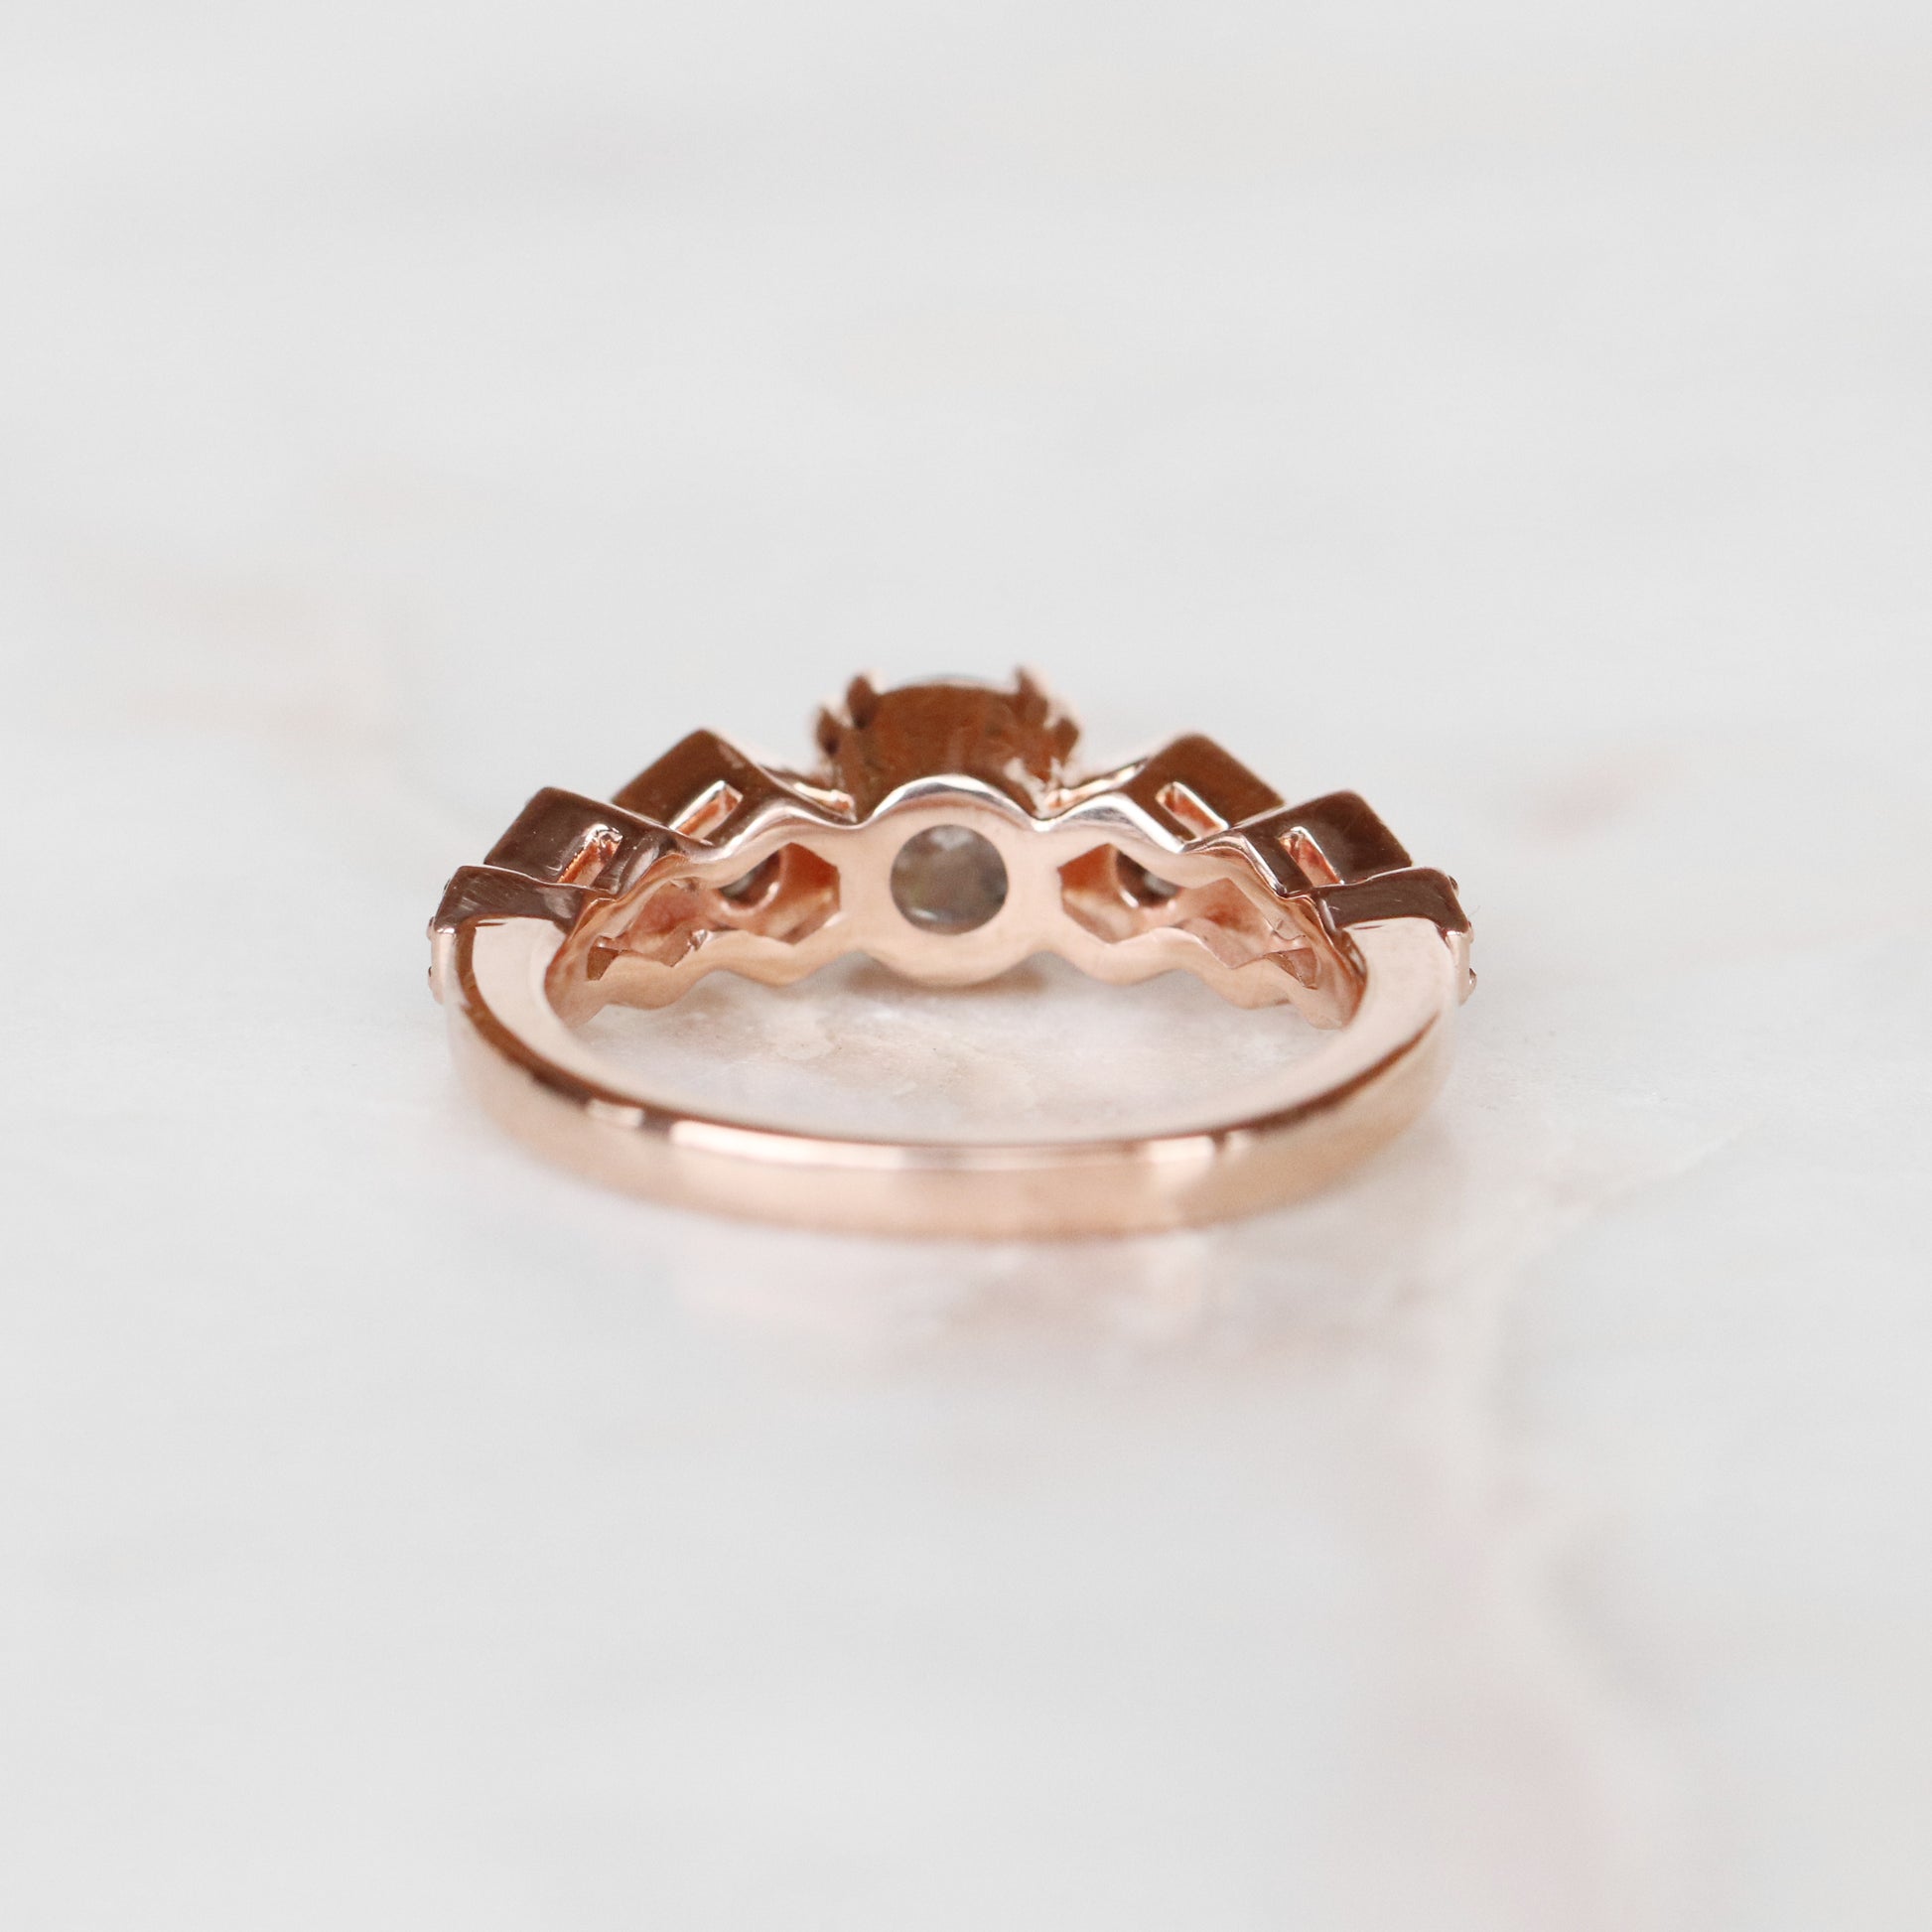 Wanda Ring with a .76 Carat Celestial Diamond and Accents in 14k Rose Gold - Ready to Size and Ship - Midwinter Co. Alternative Bridal Rings and Modern Fine Jewelry